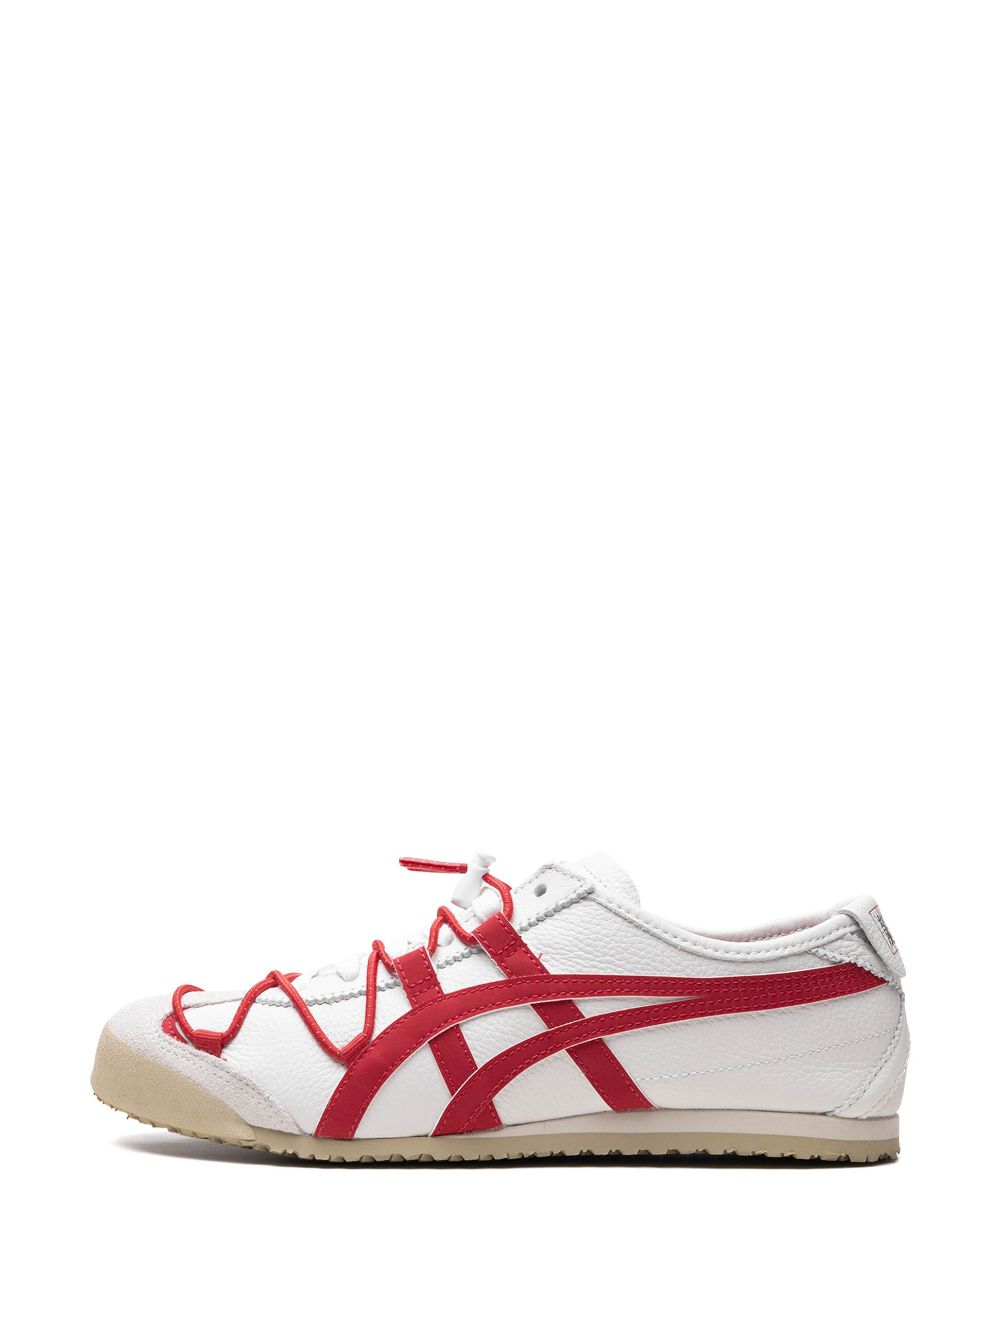 Shop Onitsuka Tiger Mexico 66 "white/classic Red" Sneakers